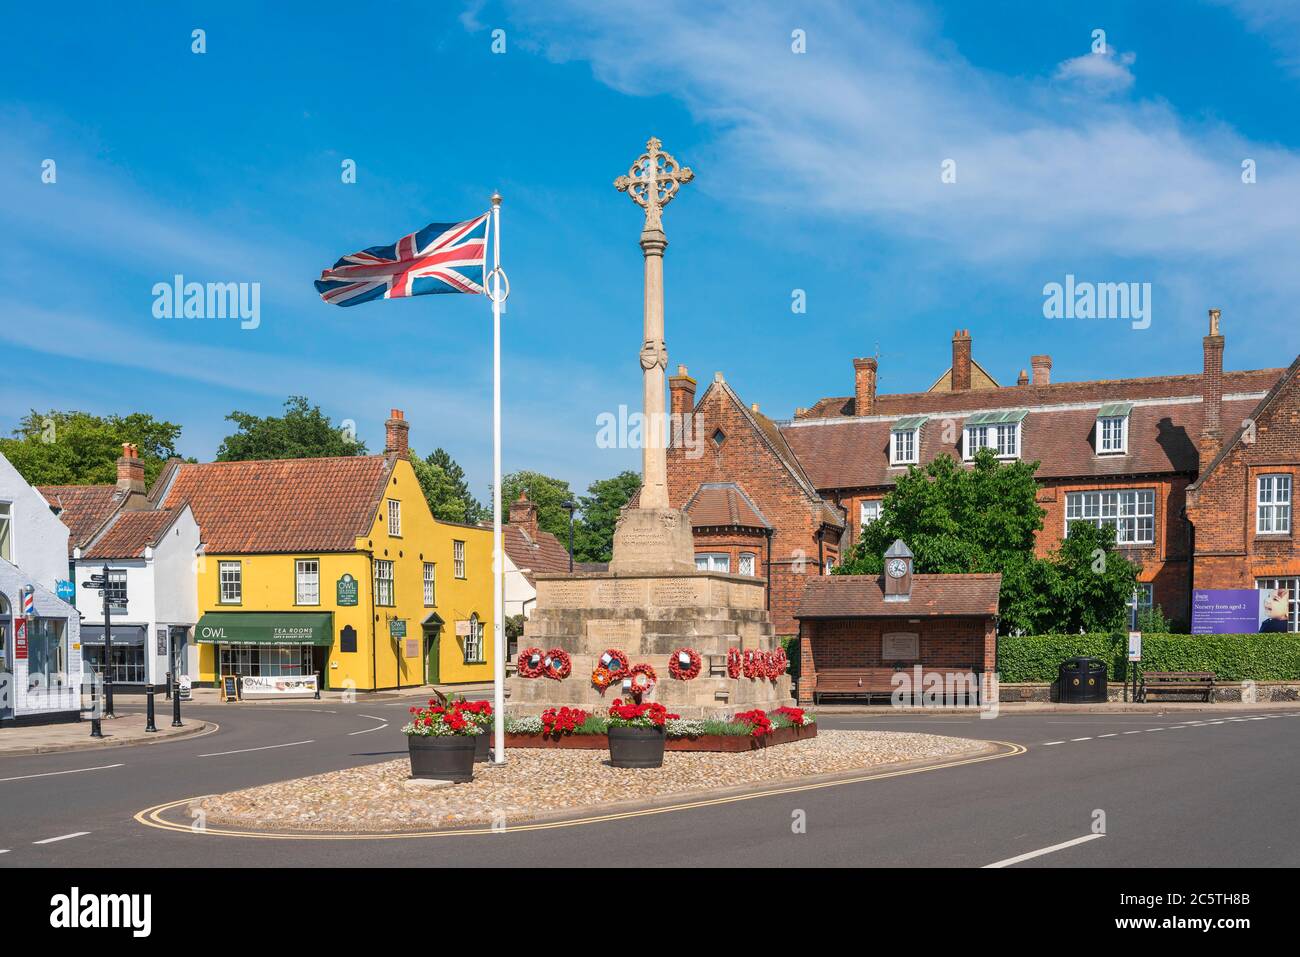 Holt Norfolk England, view in summer of the Market Place in Holt village showing the war memorial and (at rear) Gresham's School, Norfolk, UK Stock Photo